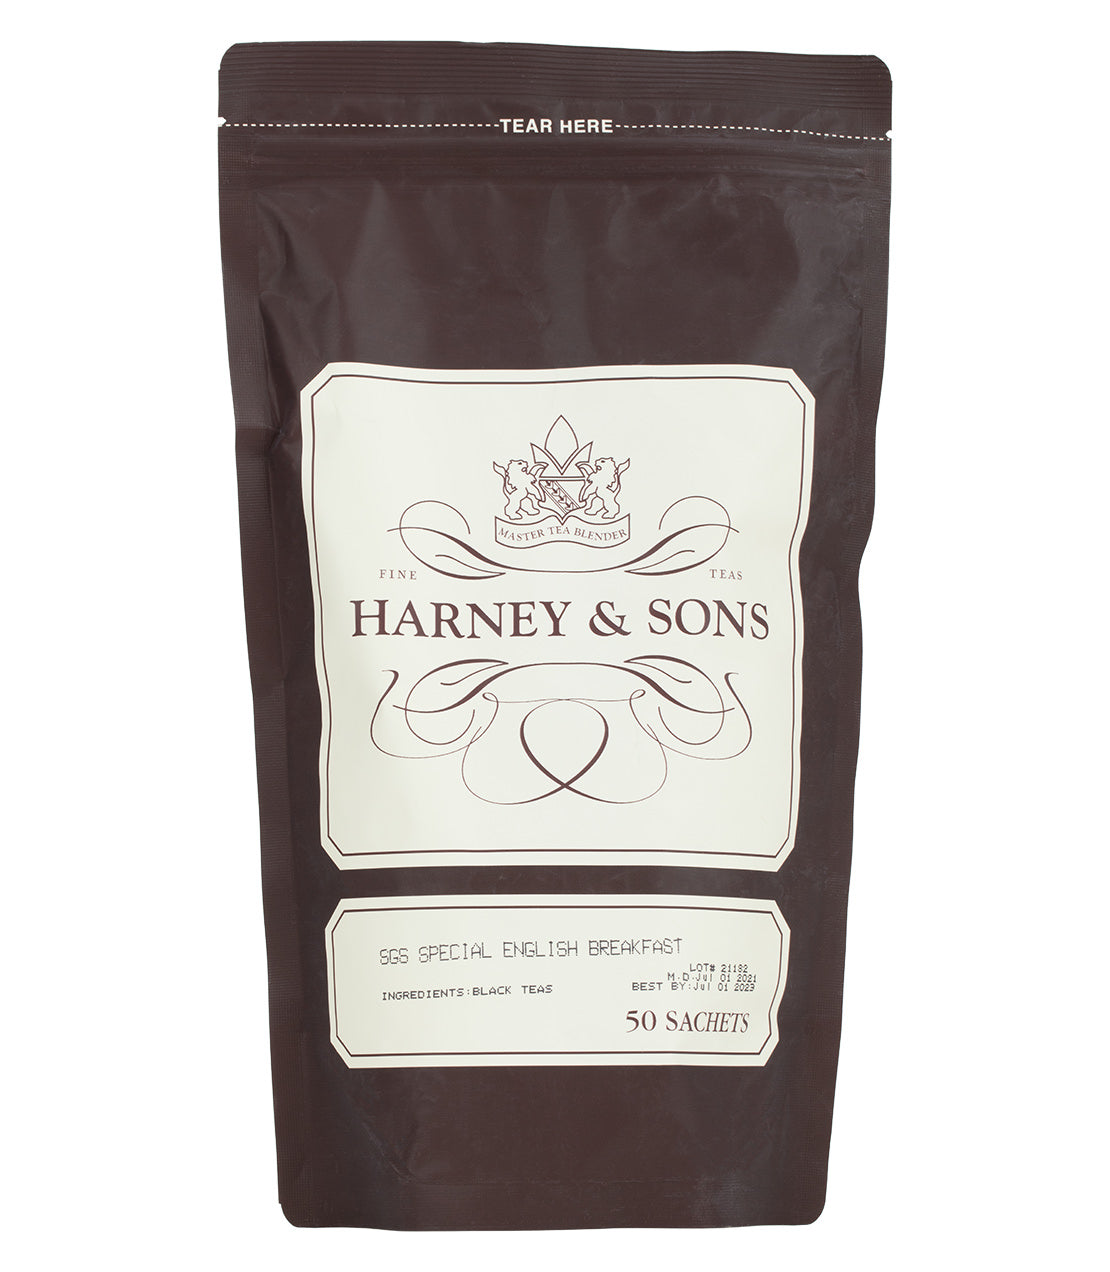 SGS Special English Breakfast, Bag of 50 Sachets - Sachets Bag of 50 Sachets - Harney & Sons Fine Teas